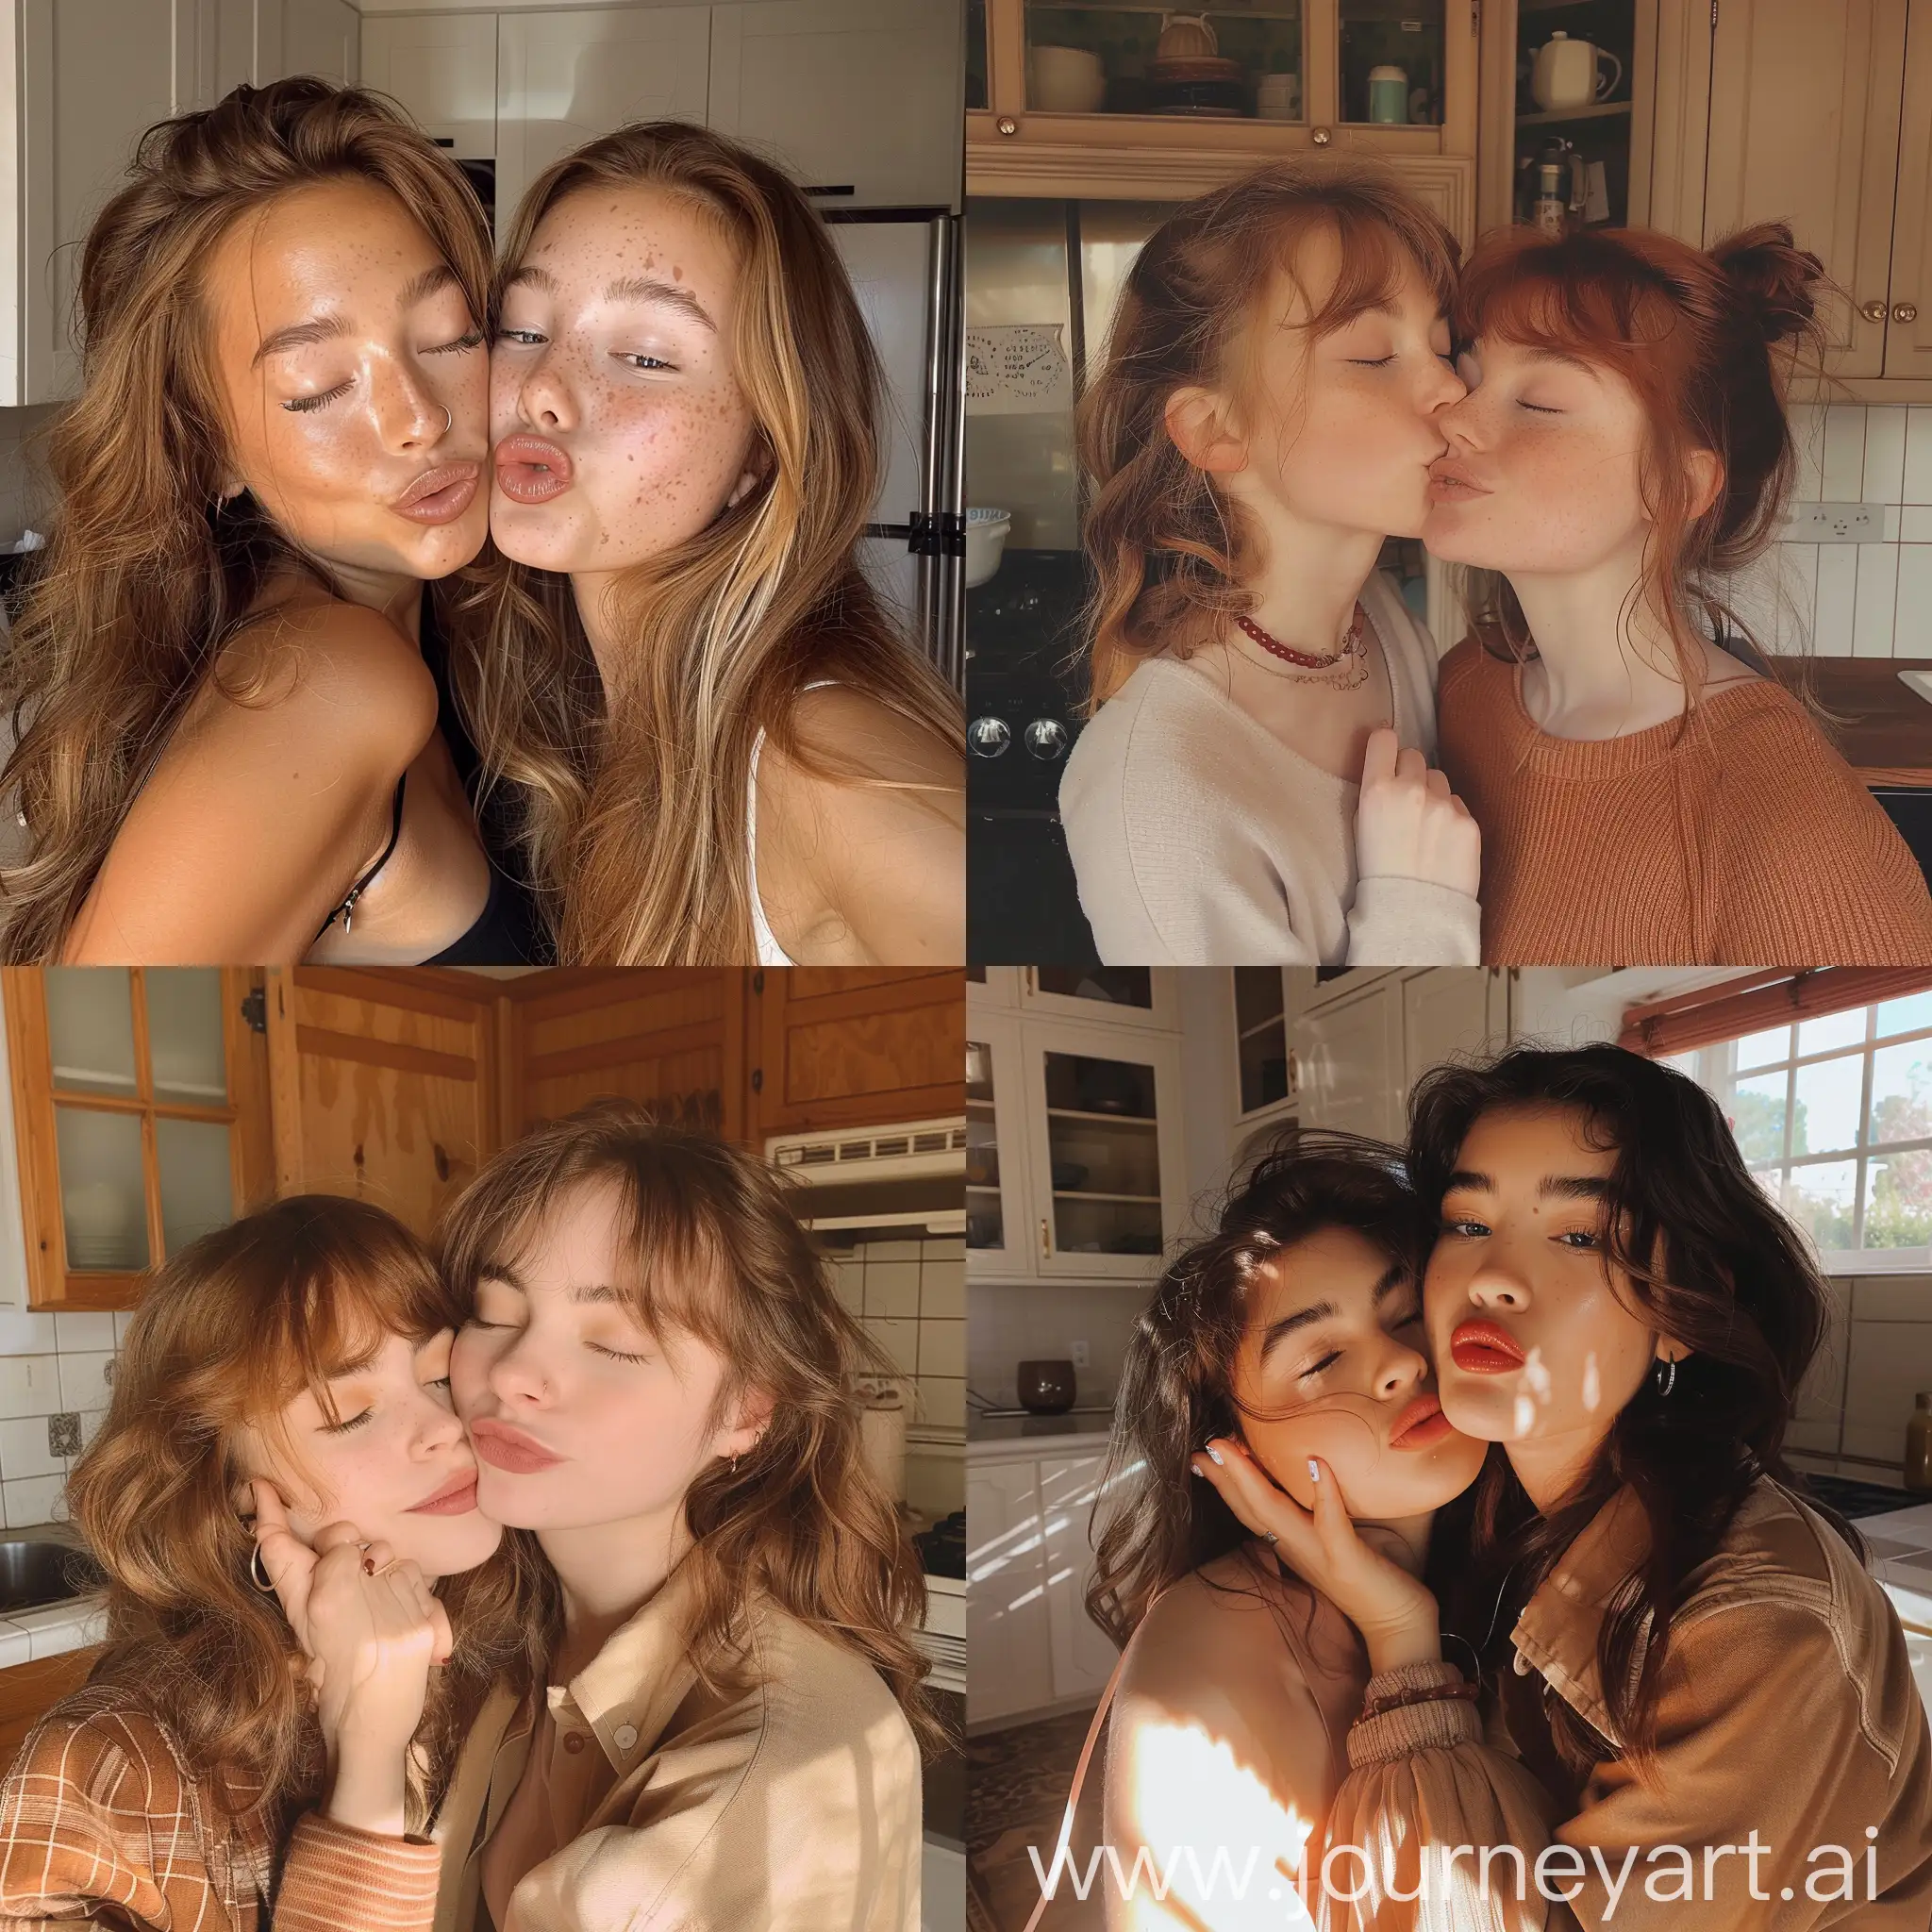 Aesthetic instagram selfie of two 16 year old girl kissing cheek with her friend, in the kitchen, warm brown tones